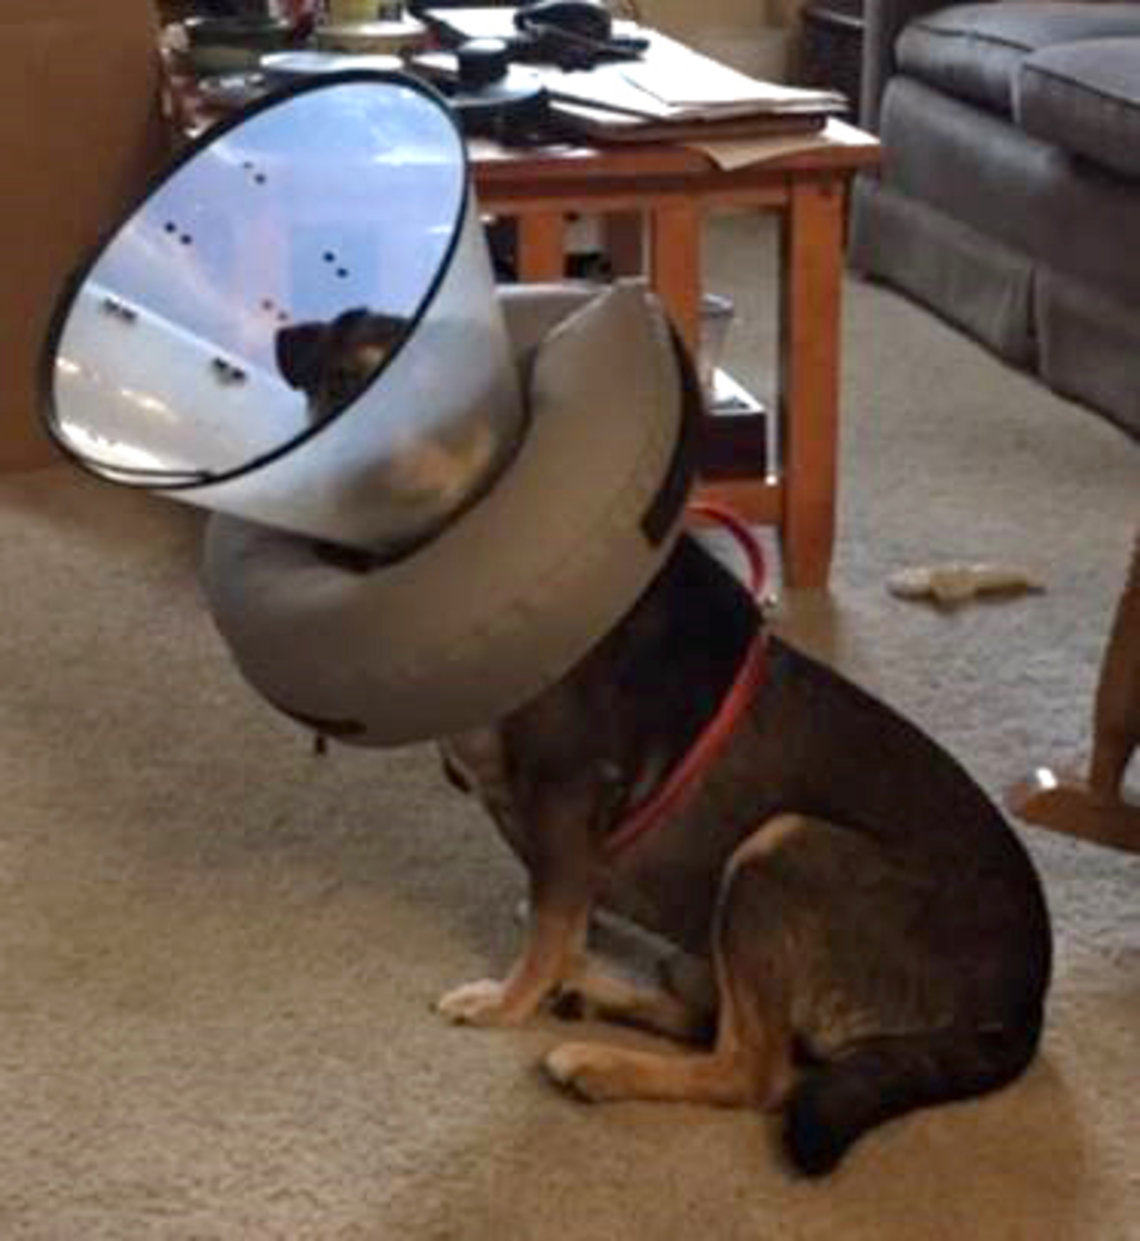 Dog wearing protective cone on neck